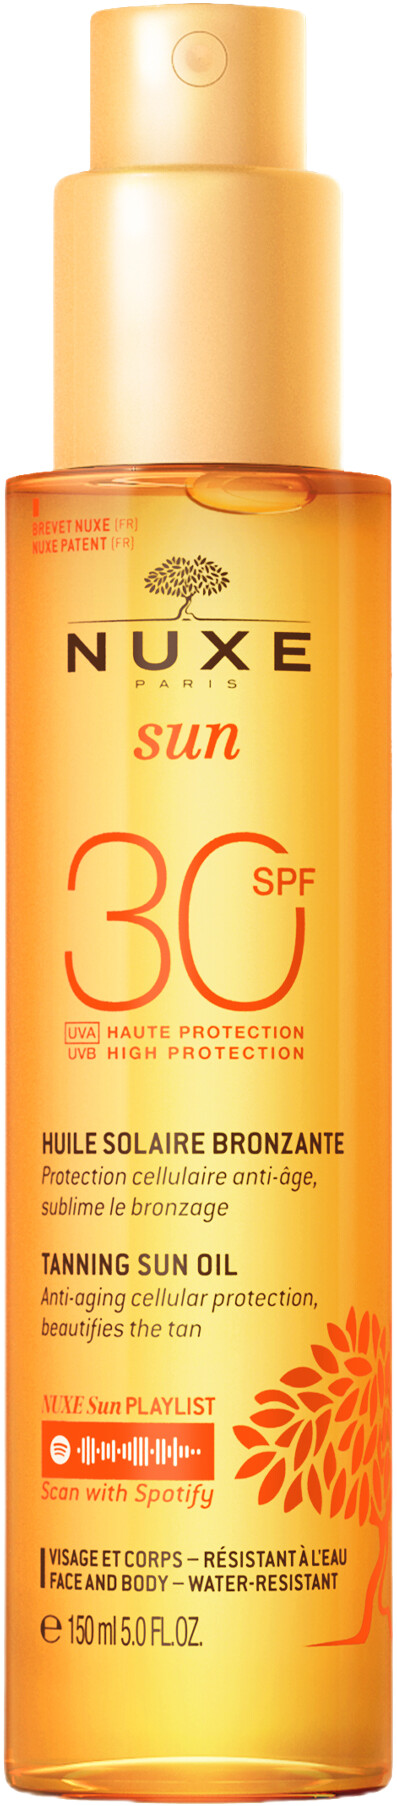 Nuxe Sun Tanning Sun Oil for Face and Body SPF 30 150ml